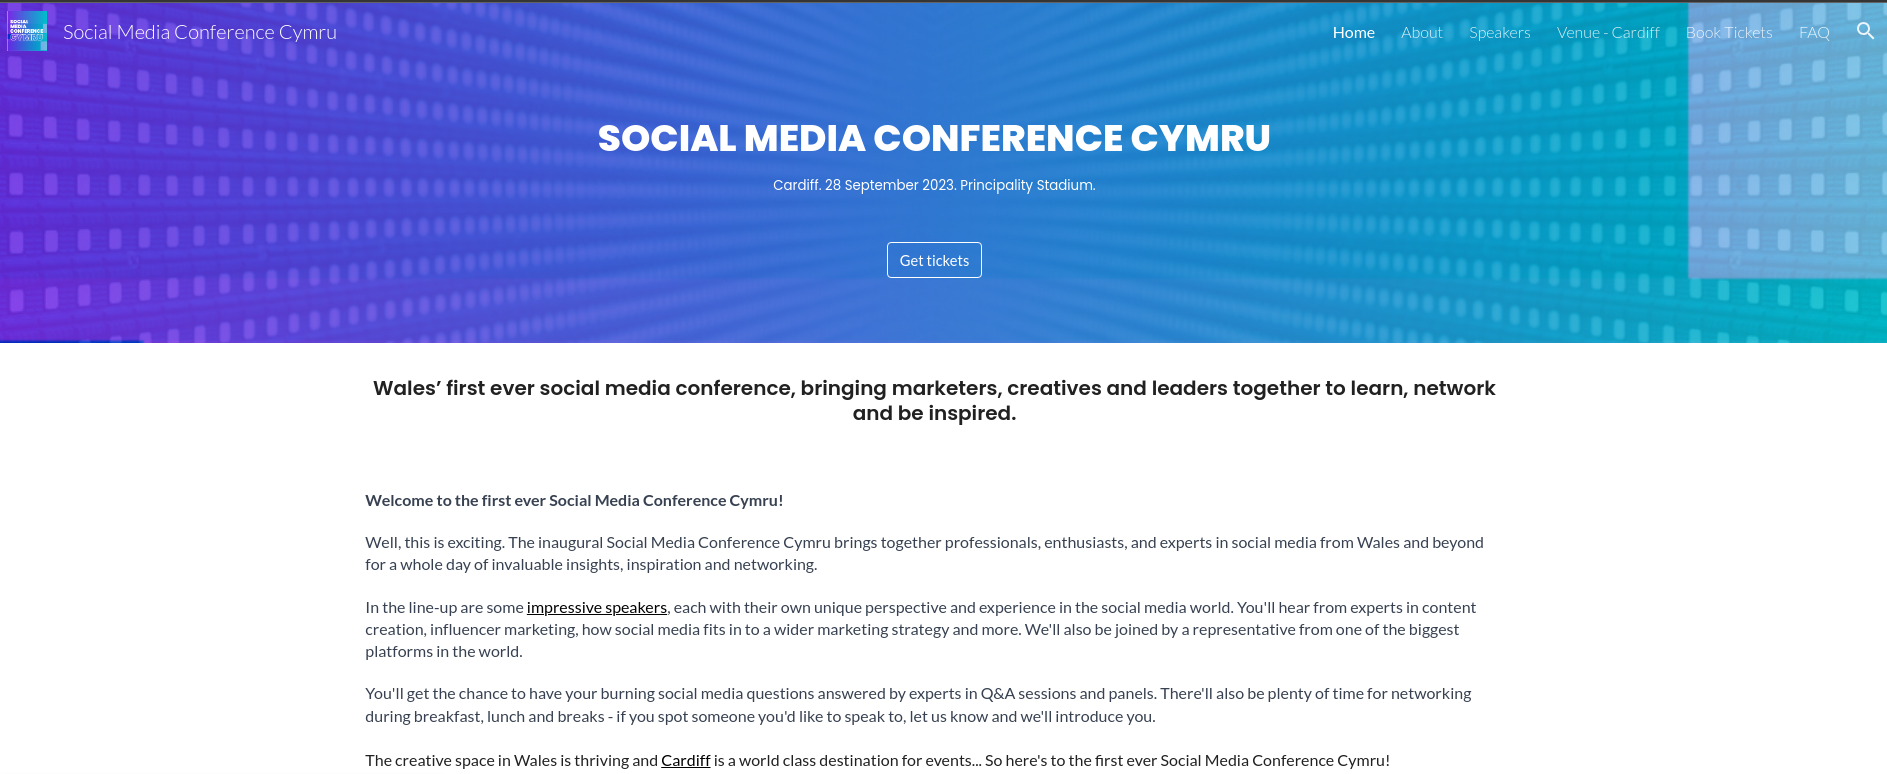 At last – a social media conference for Wales 🥳🙄